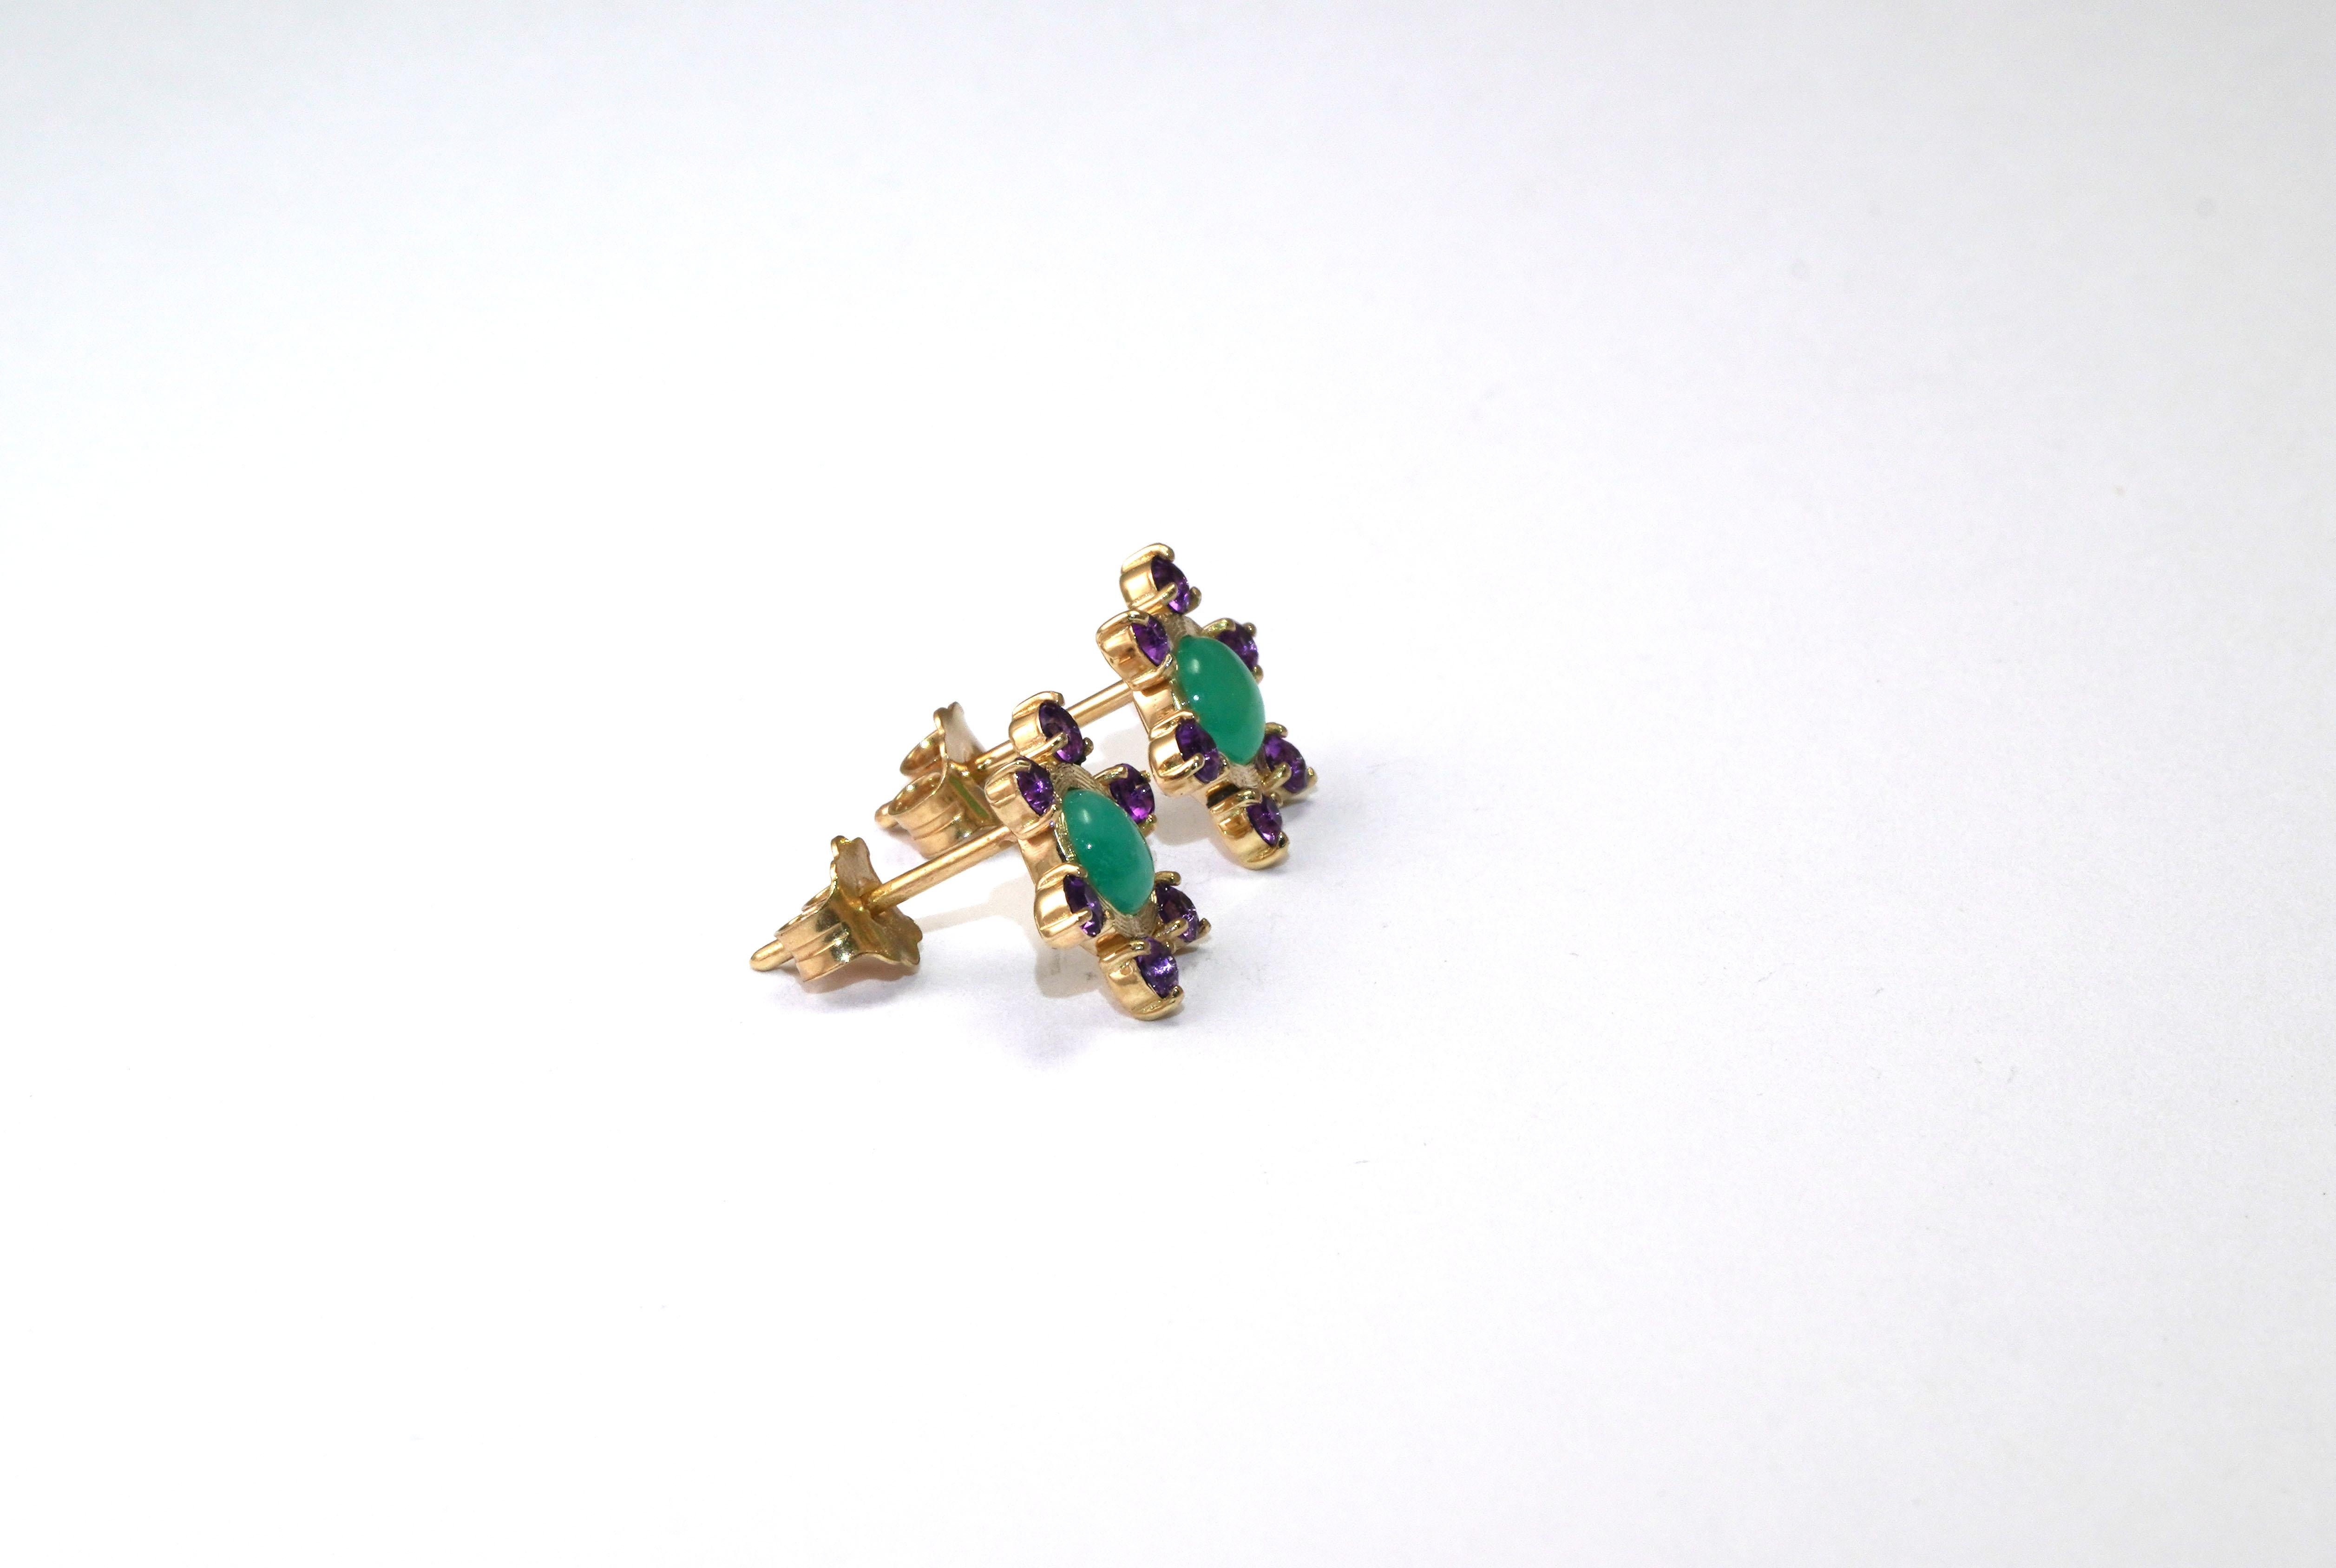 14 Karat Yellow Gold Emerald Amethyst Earrings
Gold kt: 14 
Gold color: Yellow
Total weight: 2.64 grams

Set with:
- Amethyst
Cut: Brilliant 
Color: Purple
- Columbian Emerald
Cut: Cabochon
Total weight: 1.16 carat
Color: Green